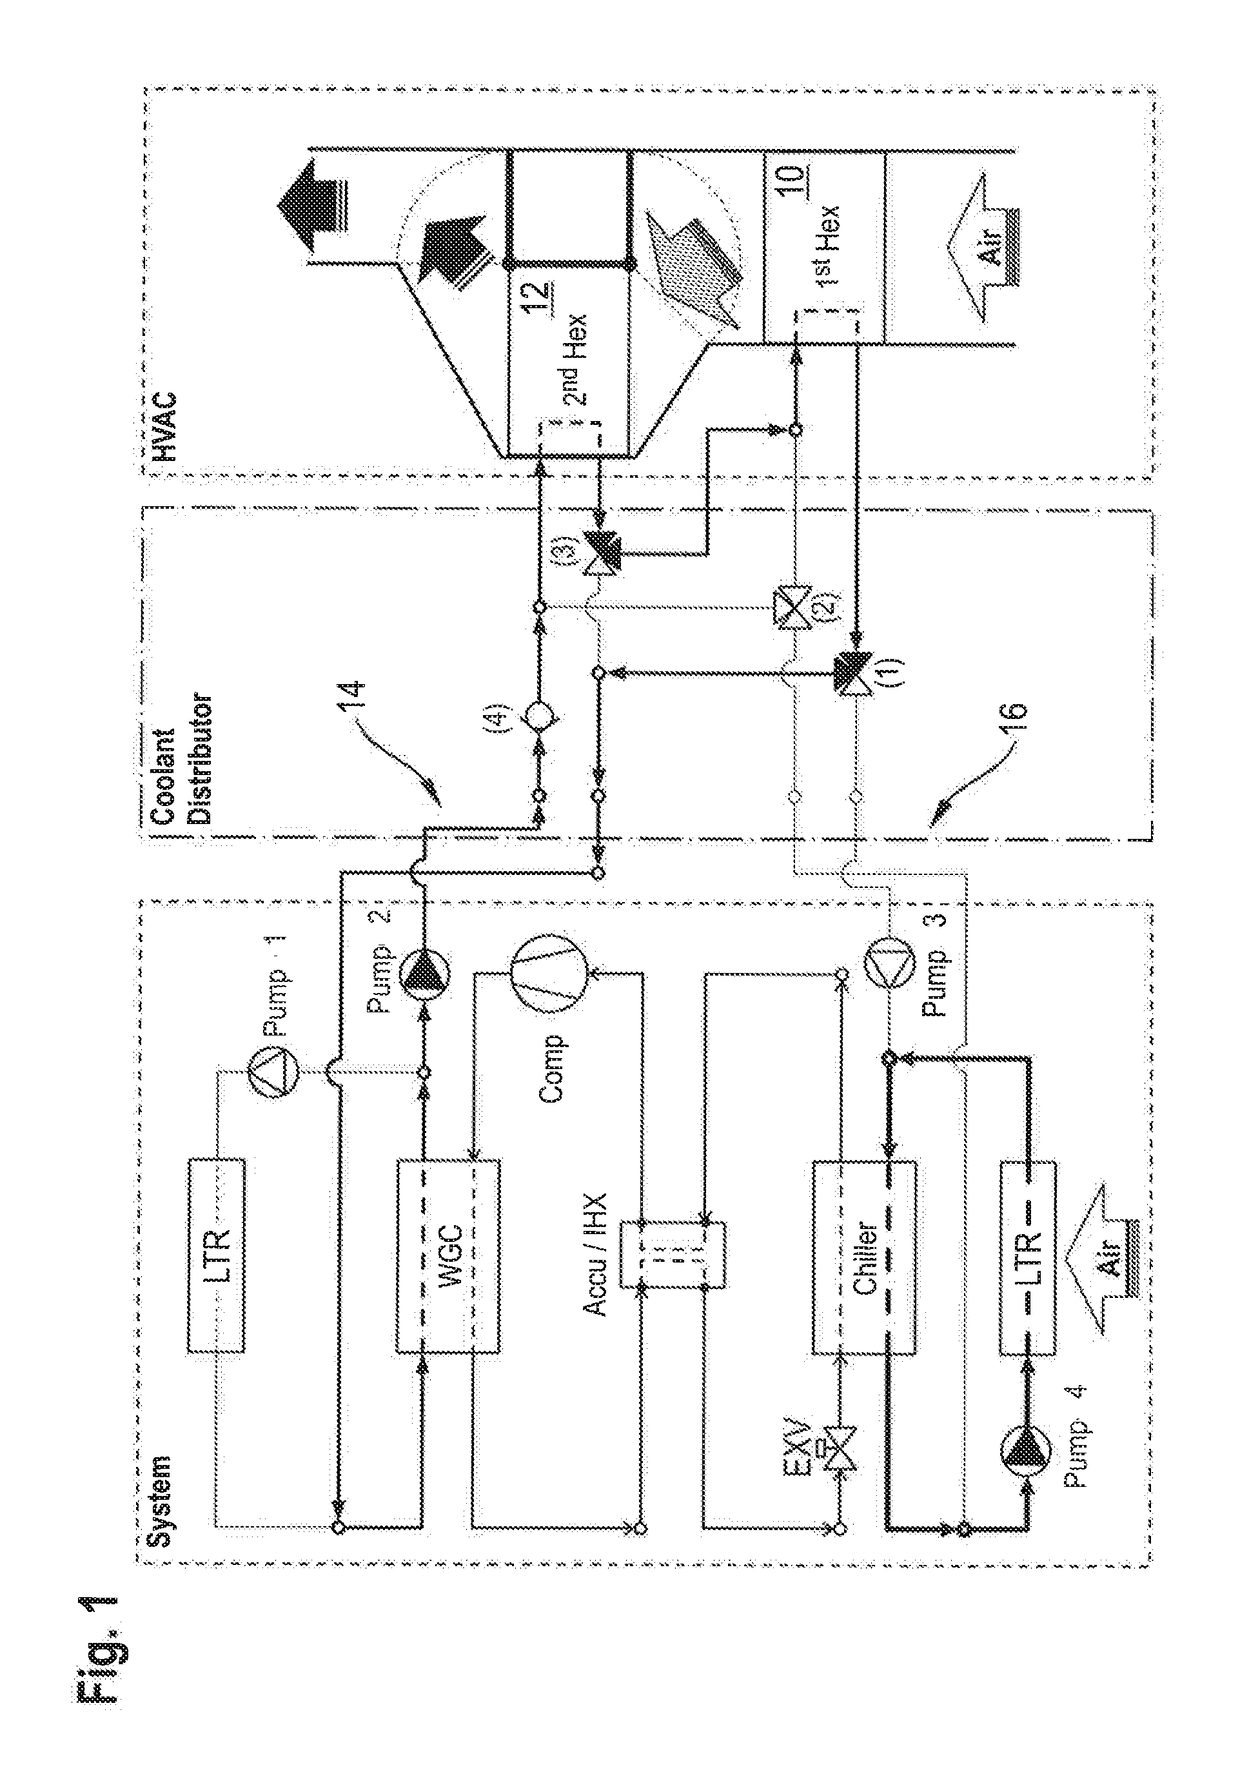 Device for distributing the coolant in an air-conditioning system of a motor vehicle